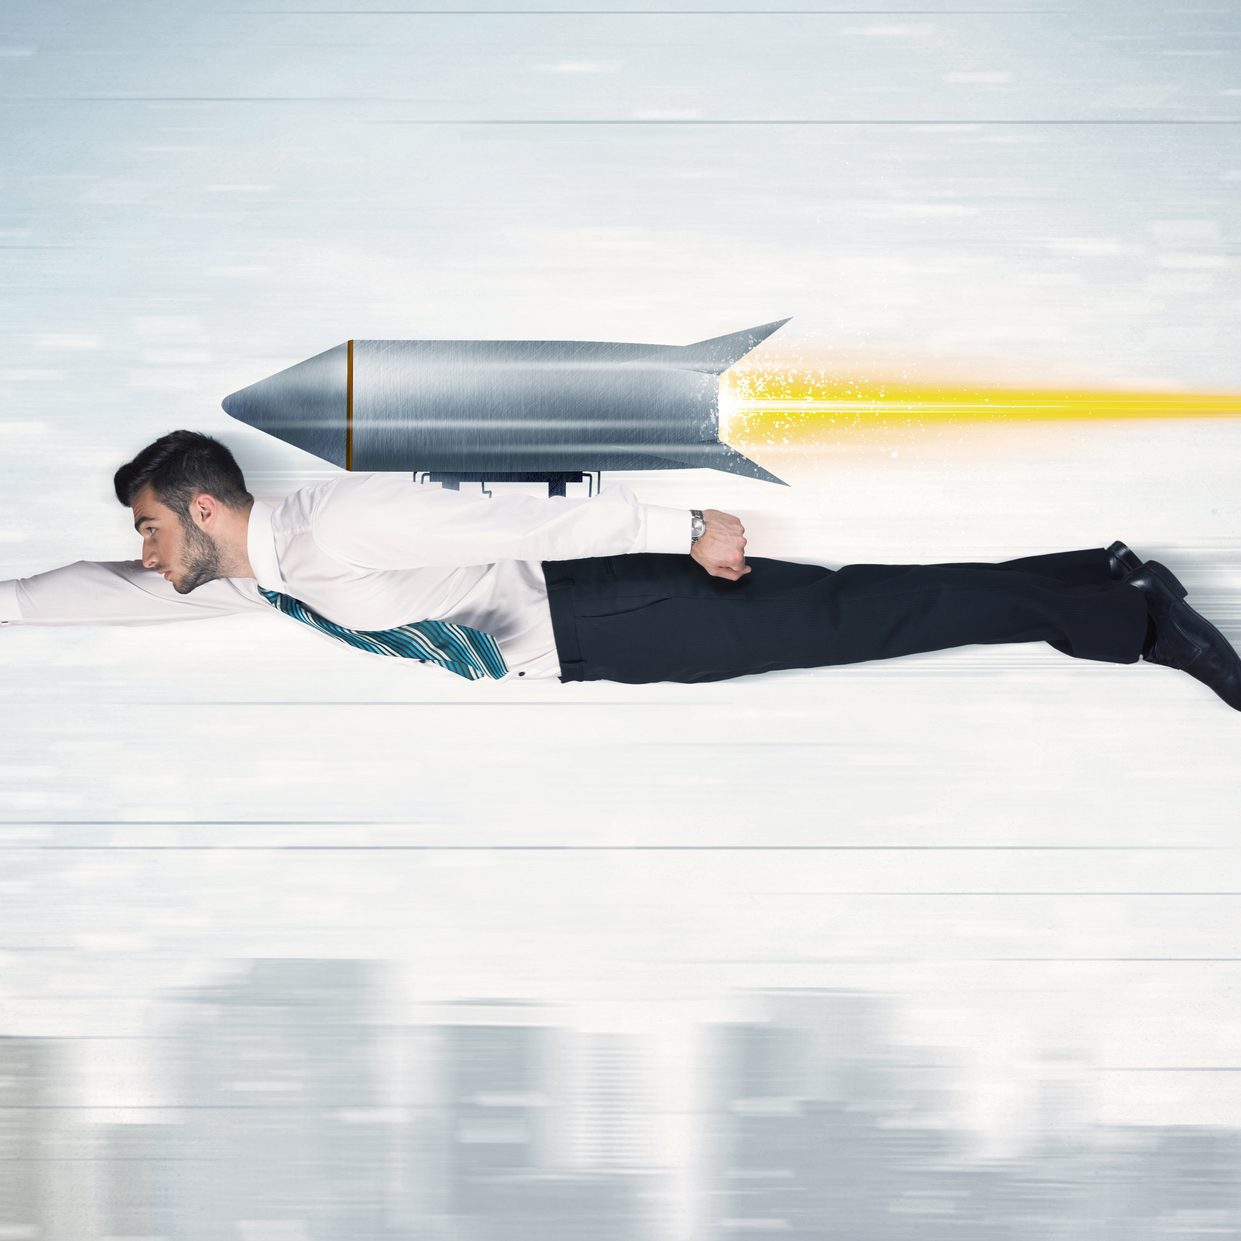 Superhero business man flying with jet pack rocket above the city concept